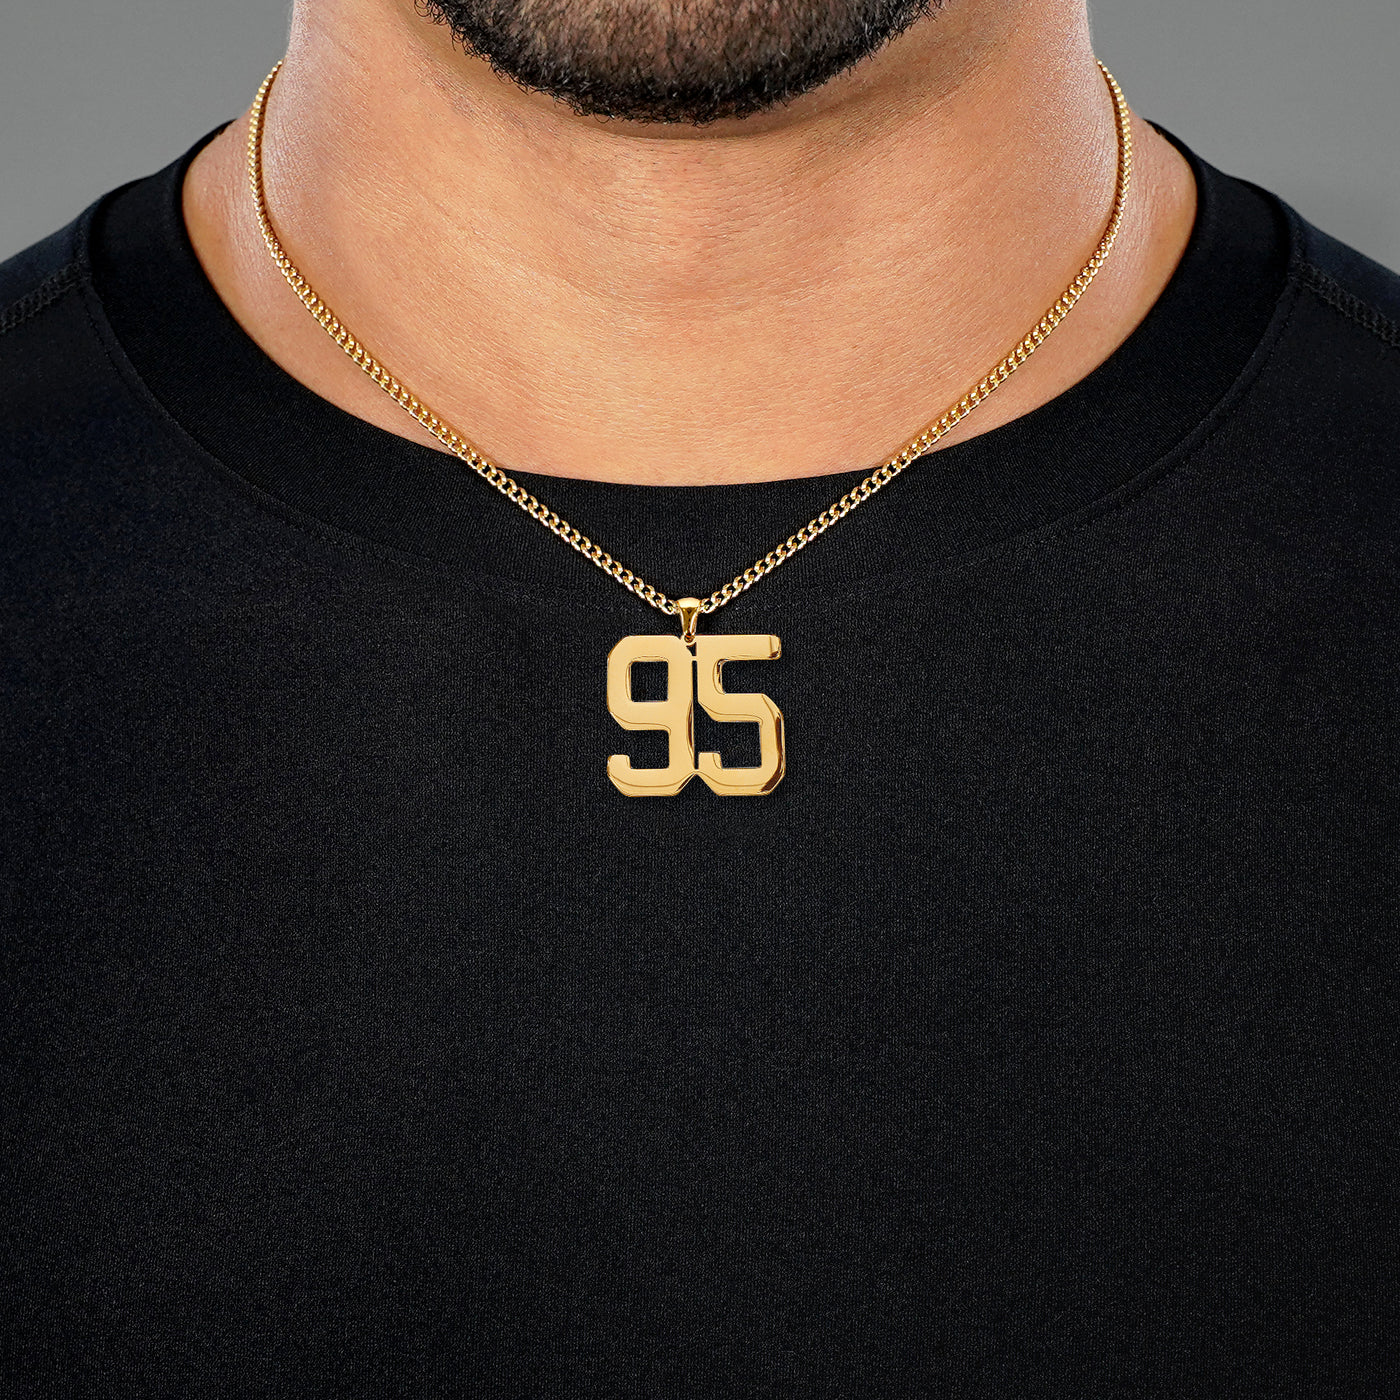 95 Number Pendant with Chain Necklace - Gold Plated Stainless Steel